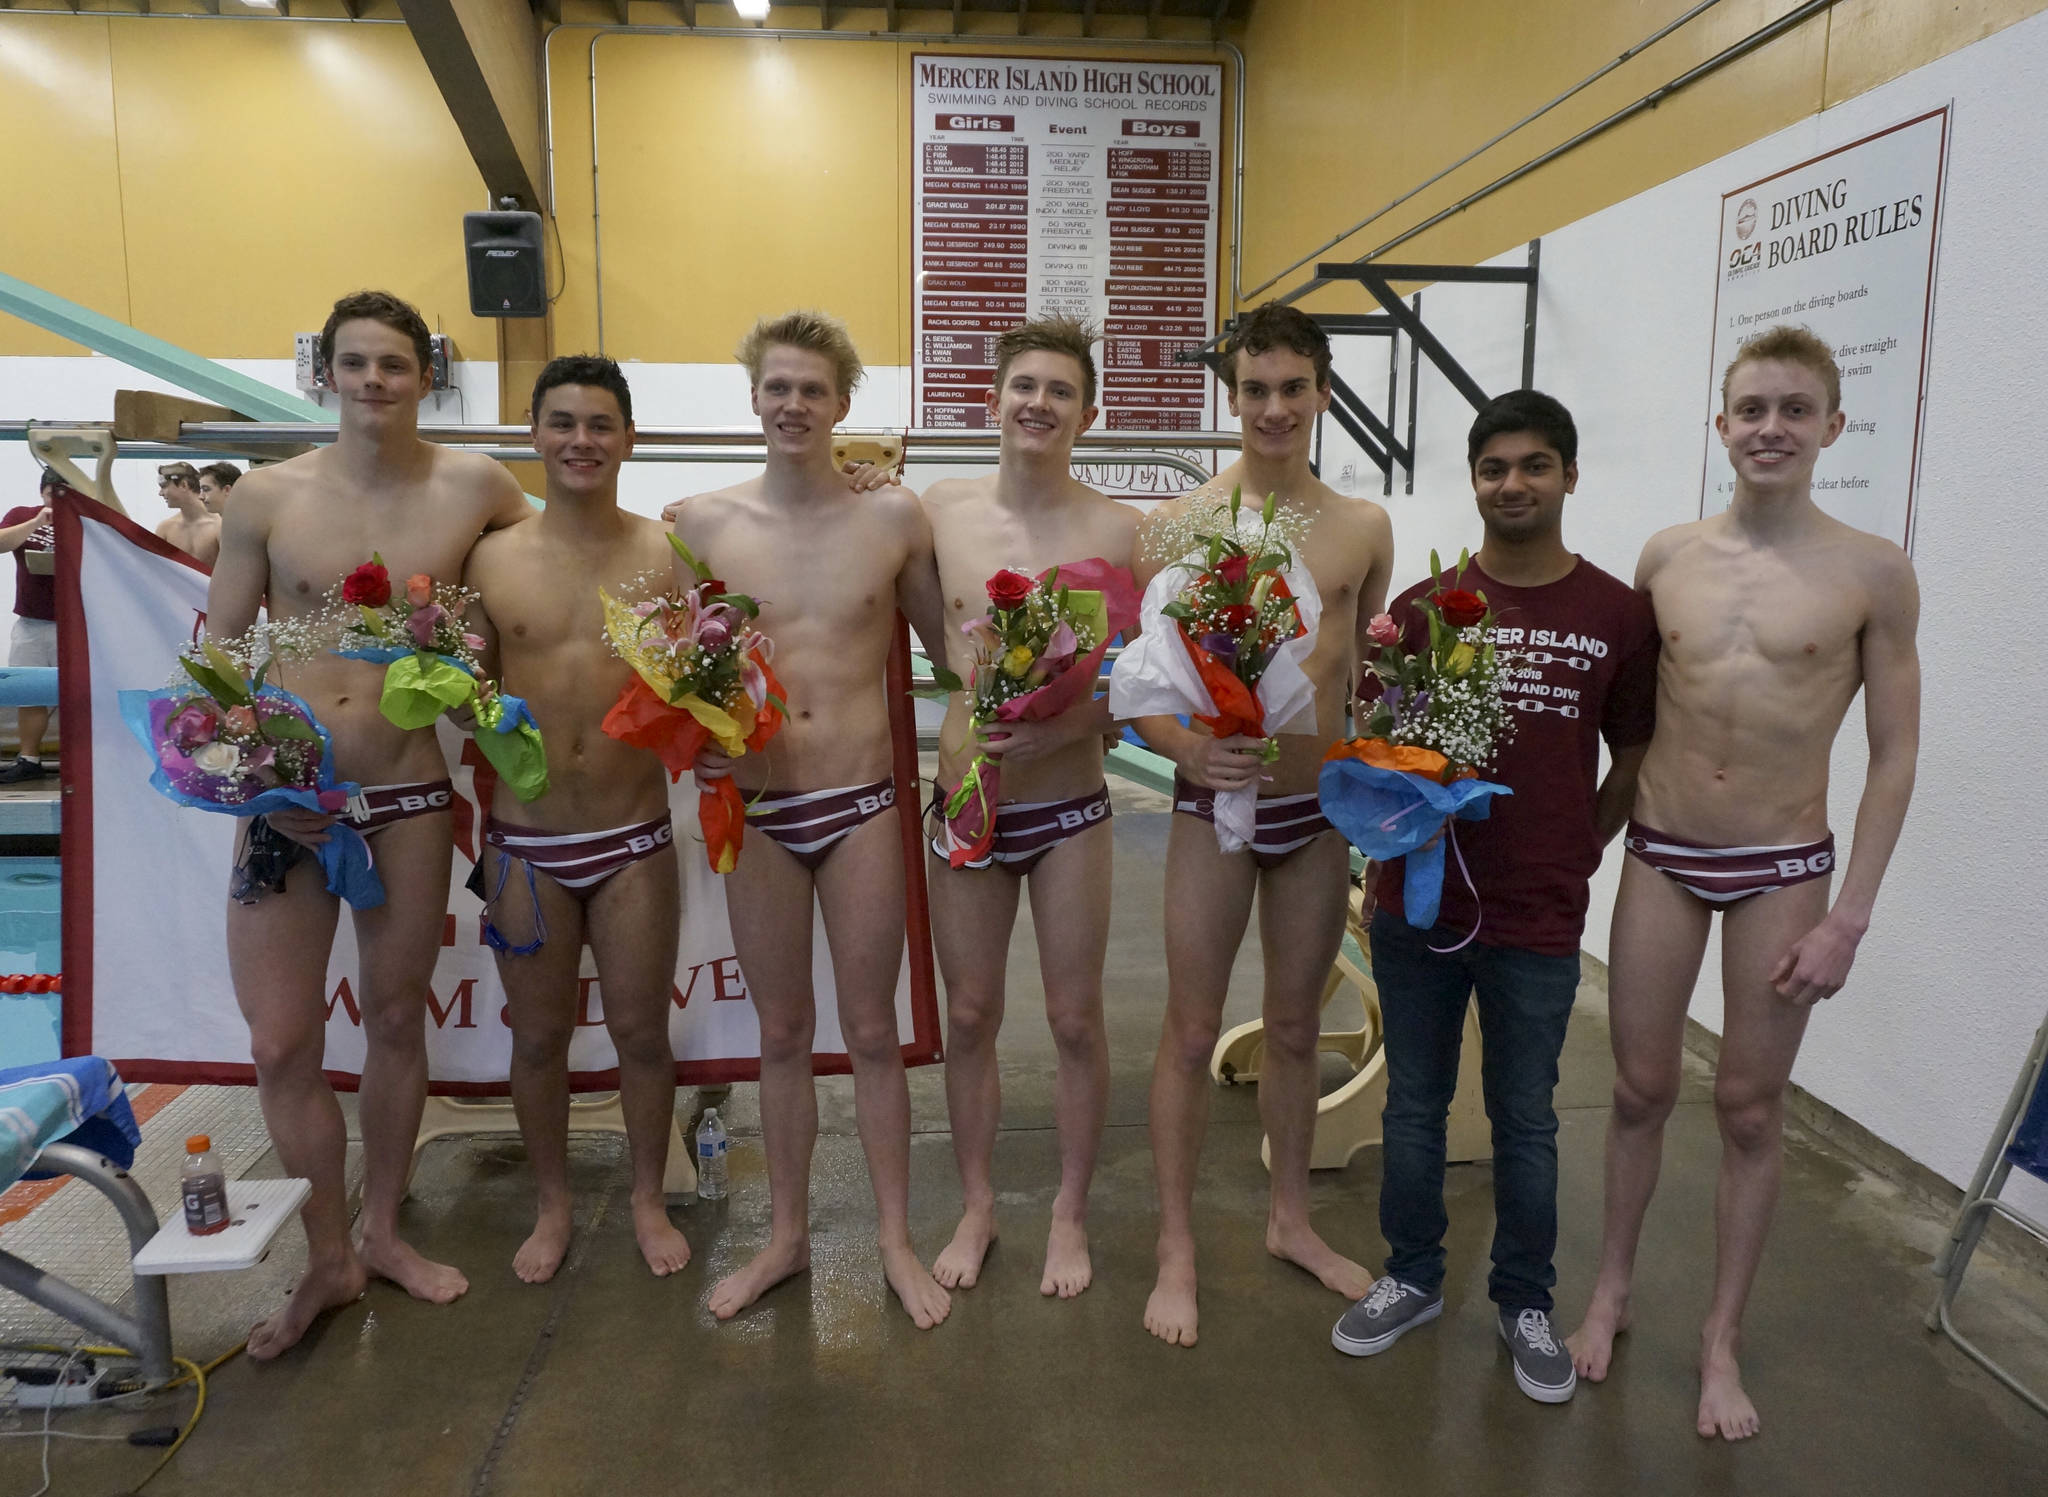 Photo courtesy of Danielle Whipple                                The Mercer Island Islanders boys swim team improved its overall record to 6-0 courtesy of a convincing 139-44 victory against the Sammamish Totems on Jan. 18 in Bellevue. Mercer Island seniors Kyle Bailey, Carson Coe, Oliver Hoff, Austin Shobe, Gabe Muzio, Param Mehta and Alex Mueller are pictured in the above photo.                                The Islanders 200 yard medley relay team of Nate Robinson, Killian Riley, James Richardson and Jake Headrick finished in first place. The 200 yard freestyle relay quartert of Hoff, Robinson, Riley and Richardson earned first place. The 400 freestyle relay team of Coe, Bailey, Shobe and Hoff registered a first place finish. Islanders’ swimmers registering first place finishes in individual events were Headrick (200 free), Caleb Apodaca (200 IM), Robinson (50 free), Bailey (100 backstroke, 100 fly), Richardson (100 free), Ralston (500 free) and Riley (100 breast stroke).